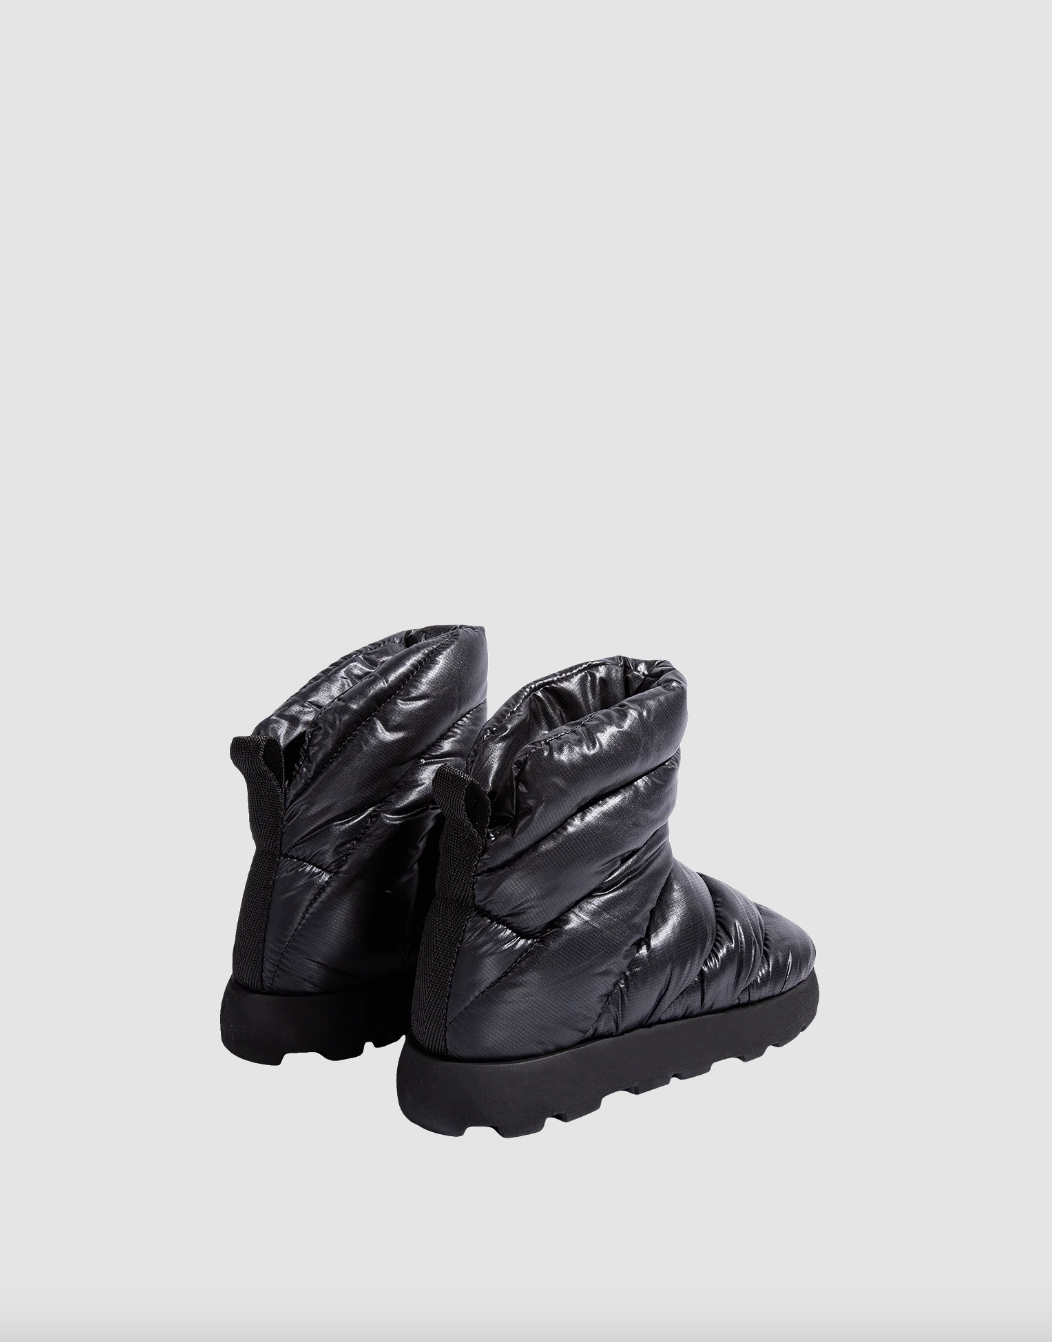 Product Image for Luna Boot, Black